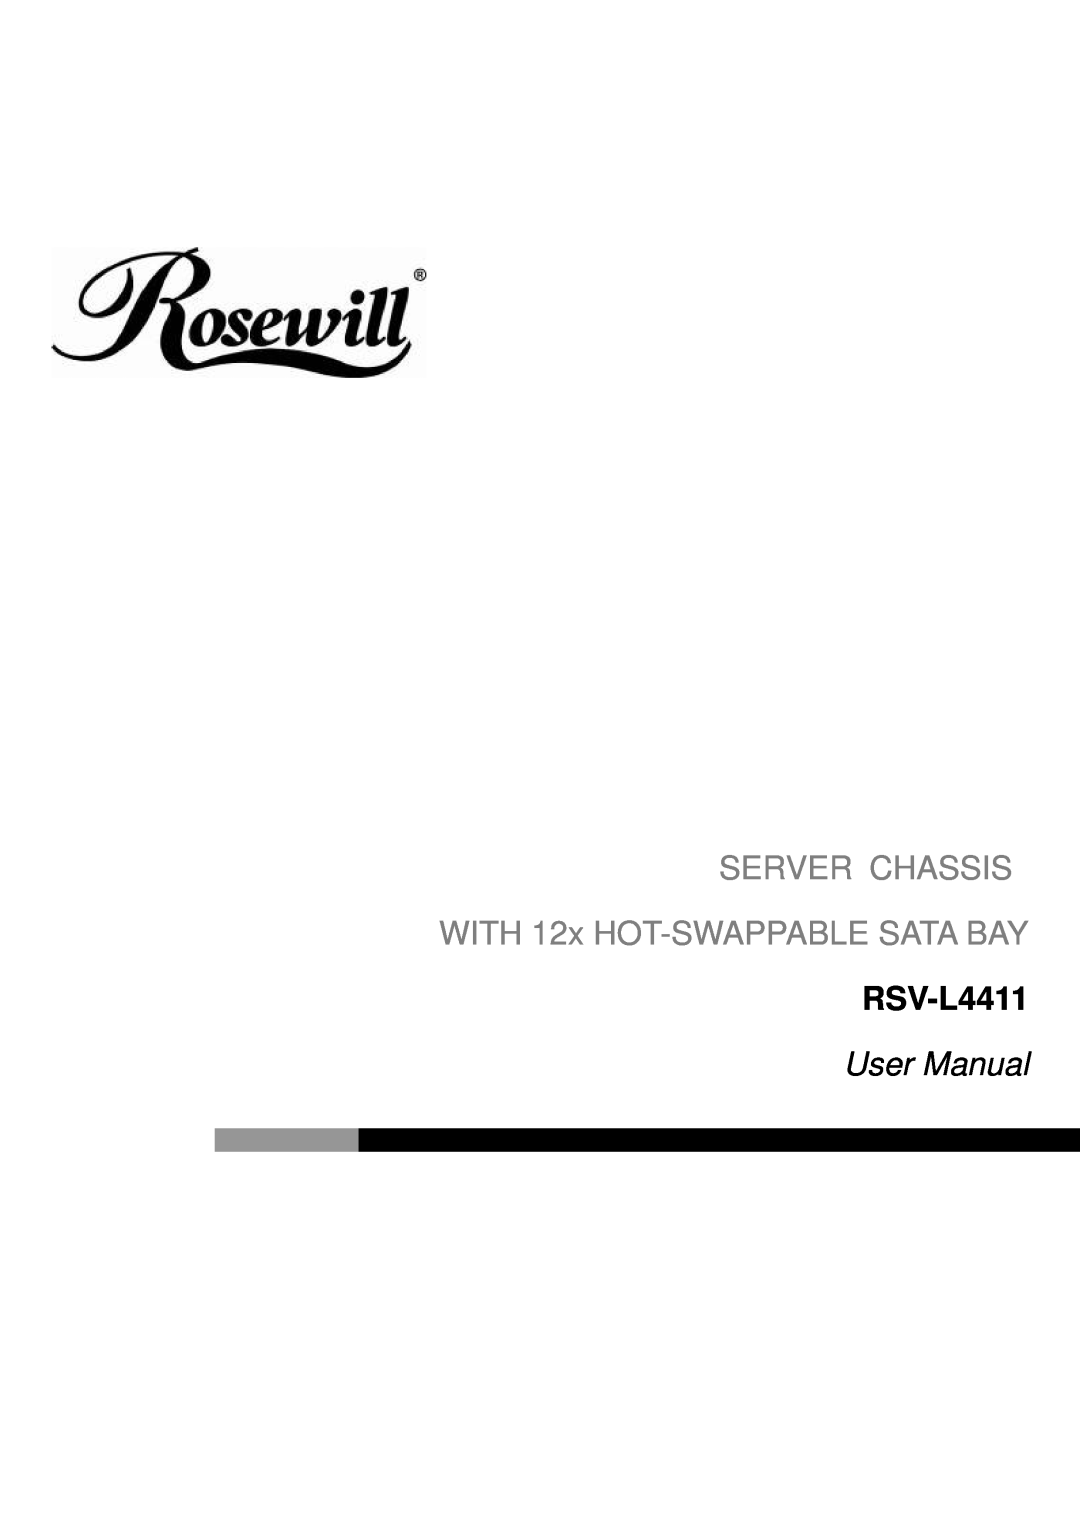 Rosewill RSV-L4411 user manual SERVER CHASSIS WITH 12x HOT-SWAPPABLE SATA BAY, User Manual 